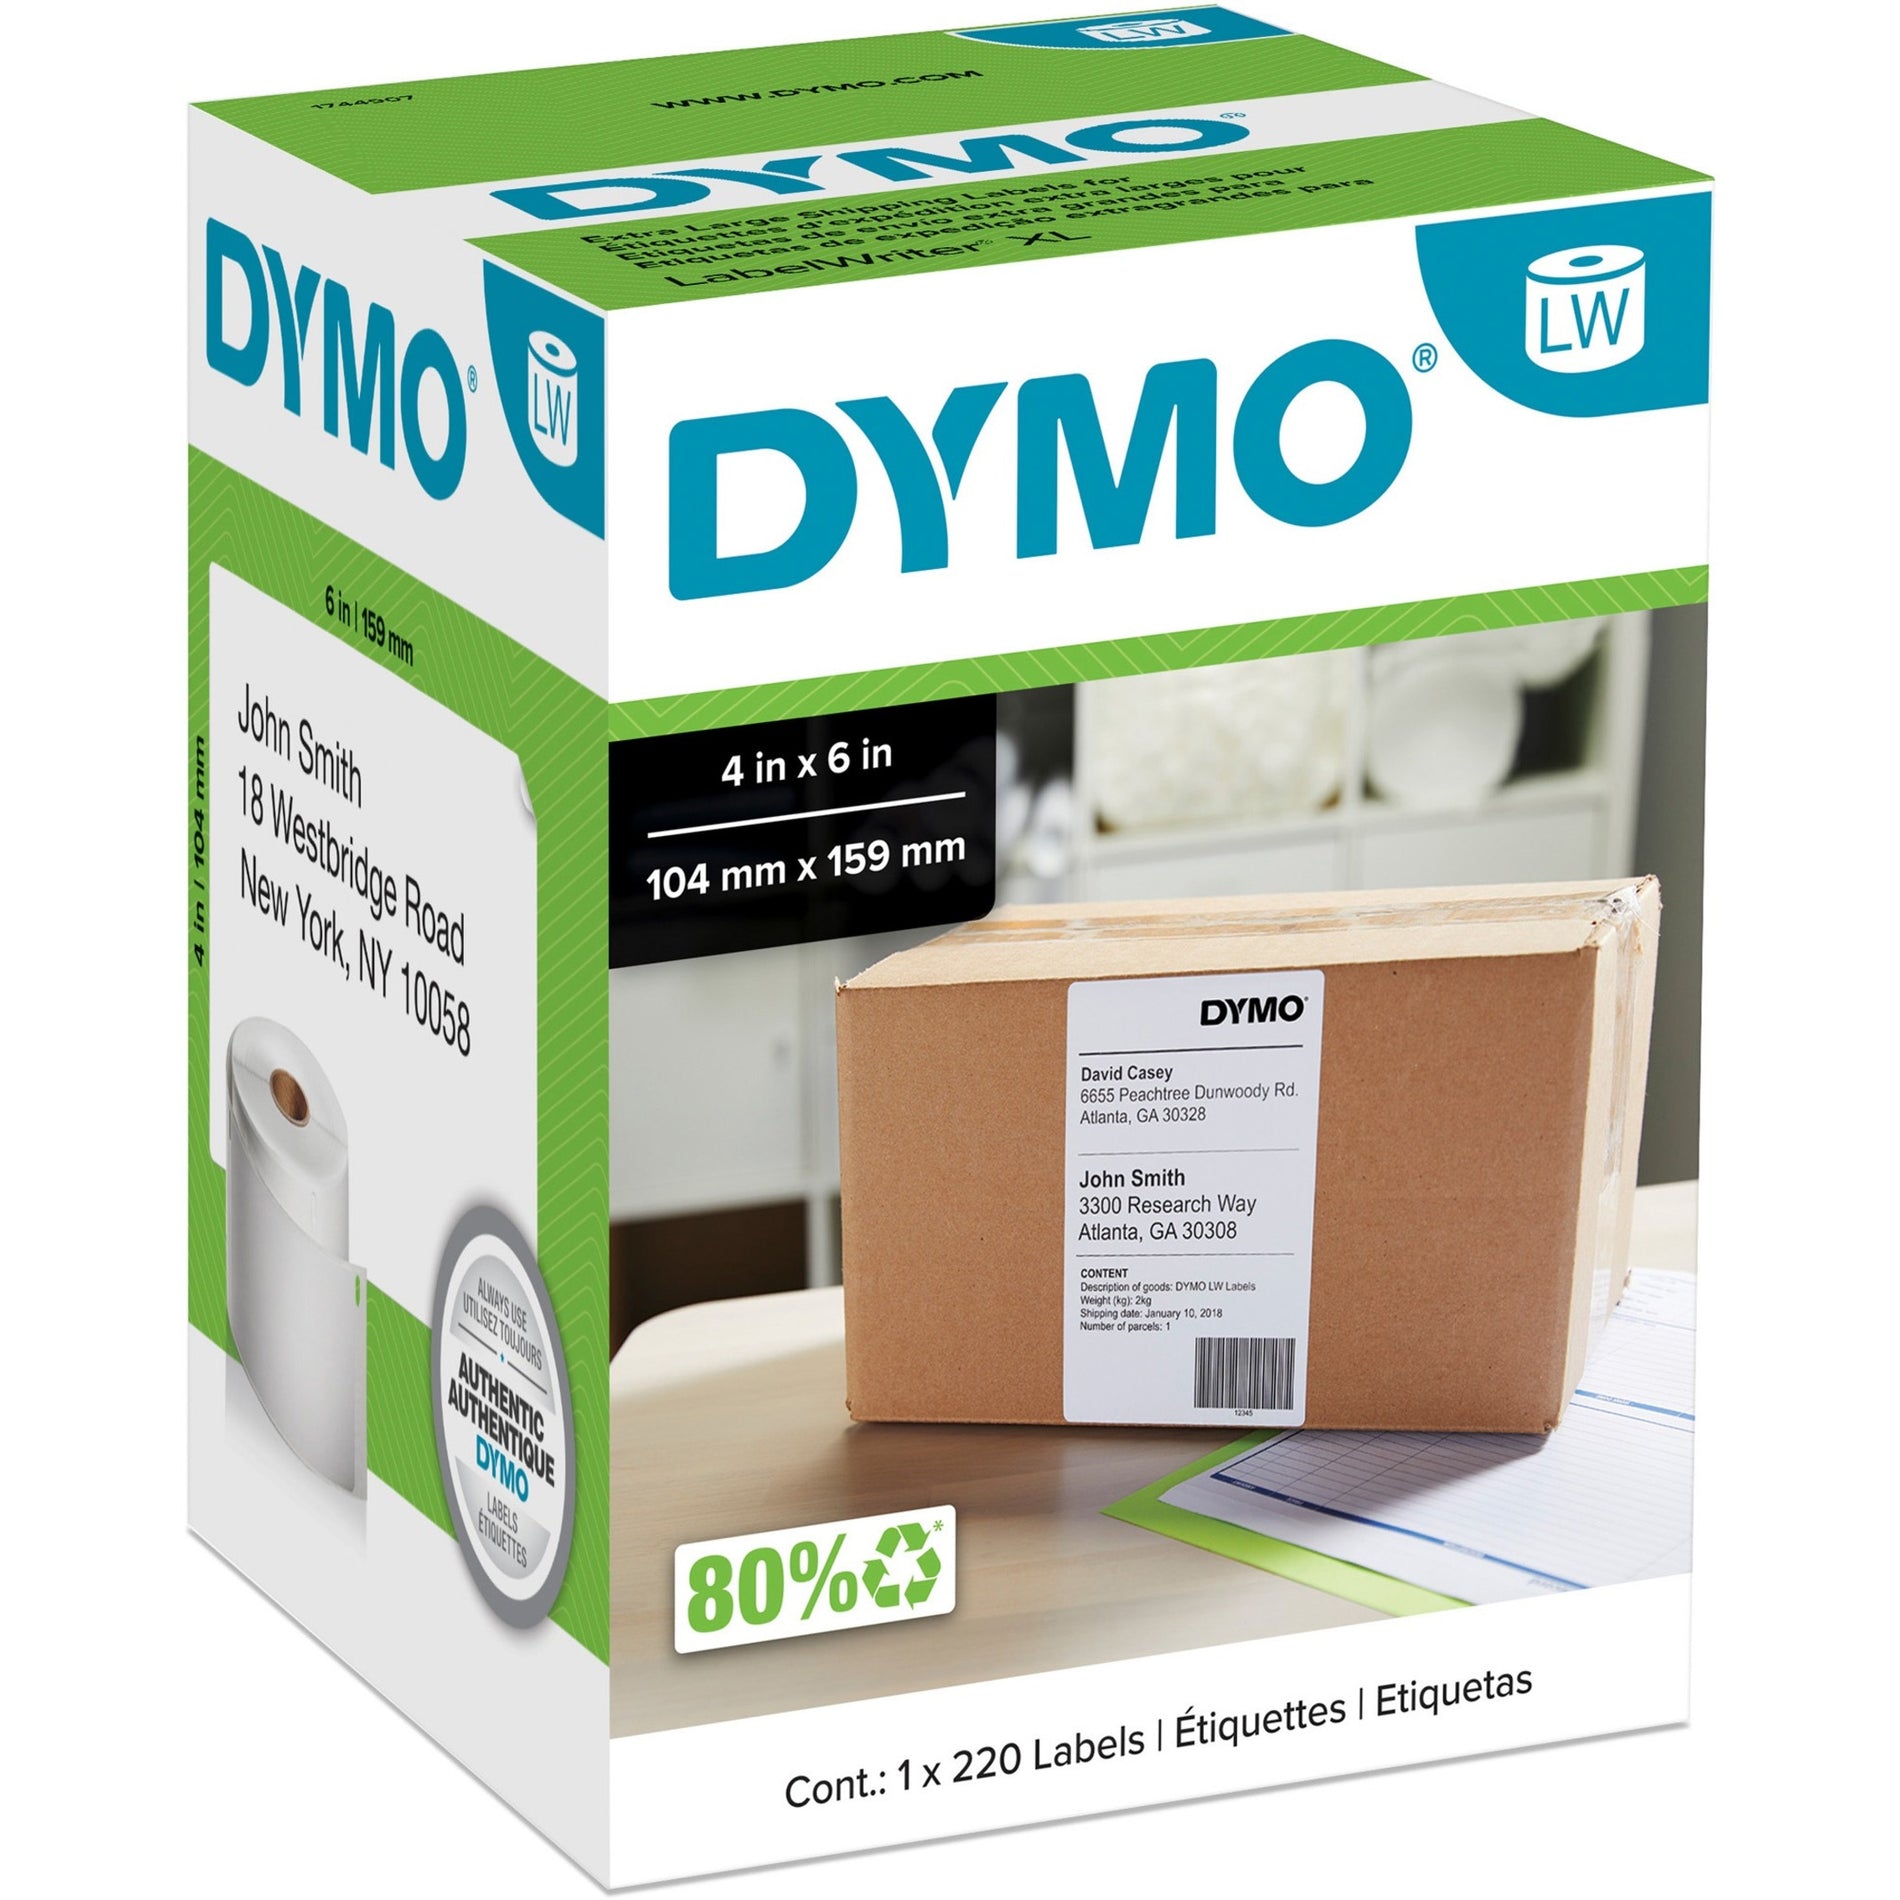 Dymo 1744907 LabelWriter 4XL Extra Large Shipping Labels, 1 Roll, 4" x 6", Thermal Transfer, 220 Labels